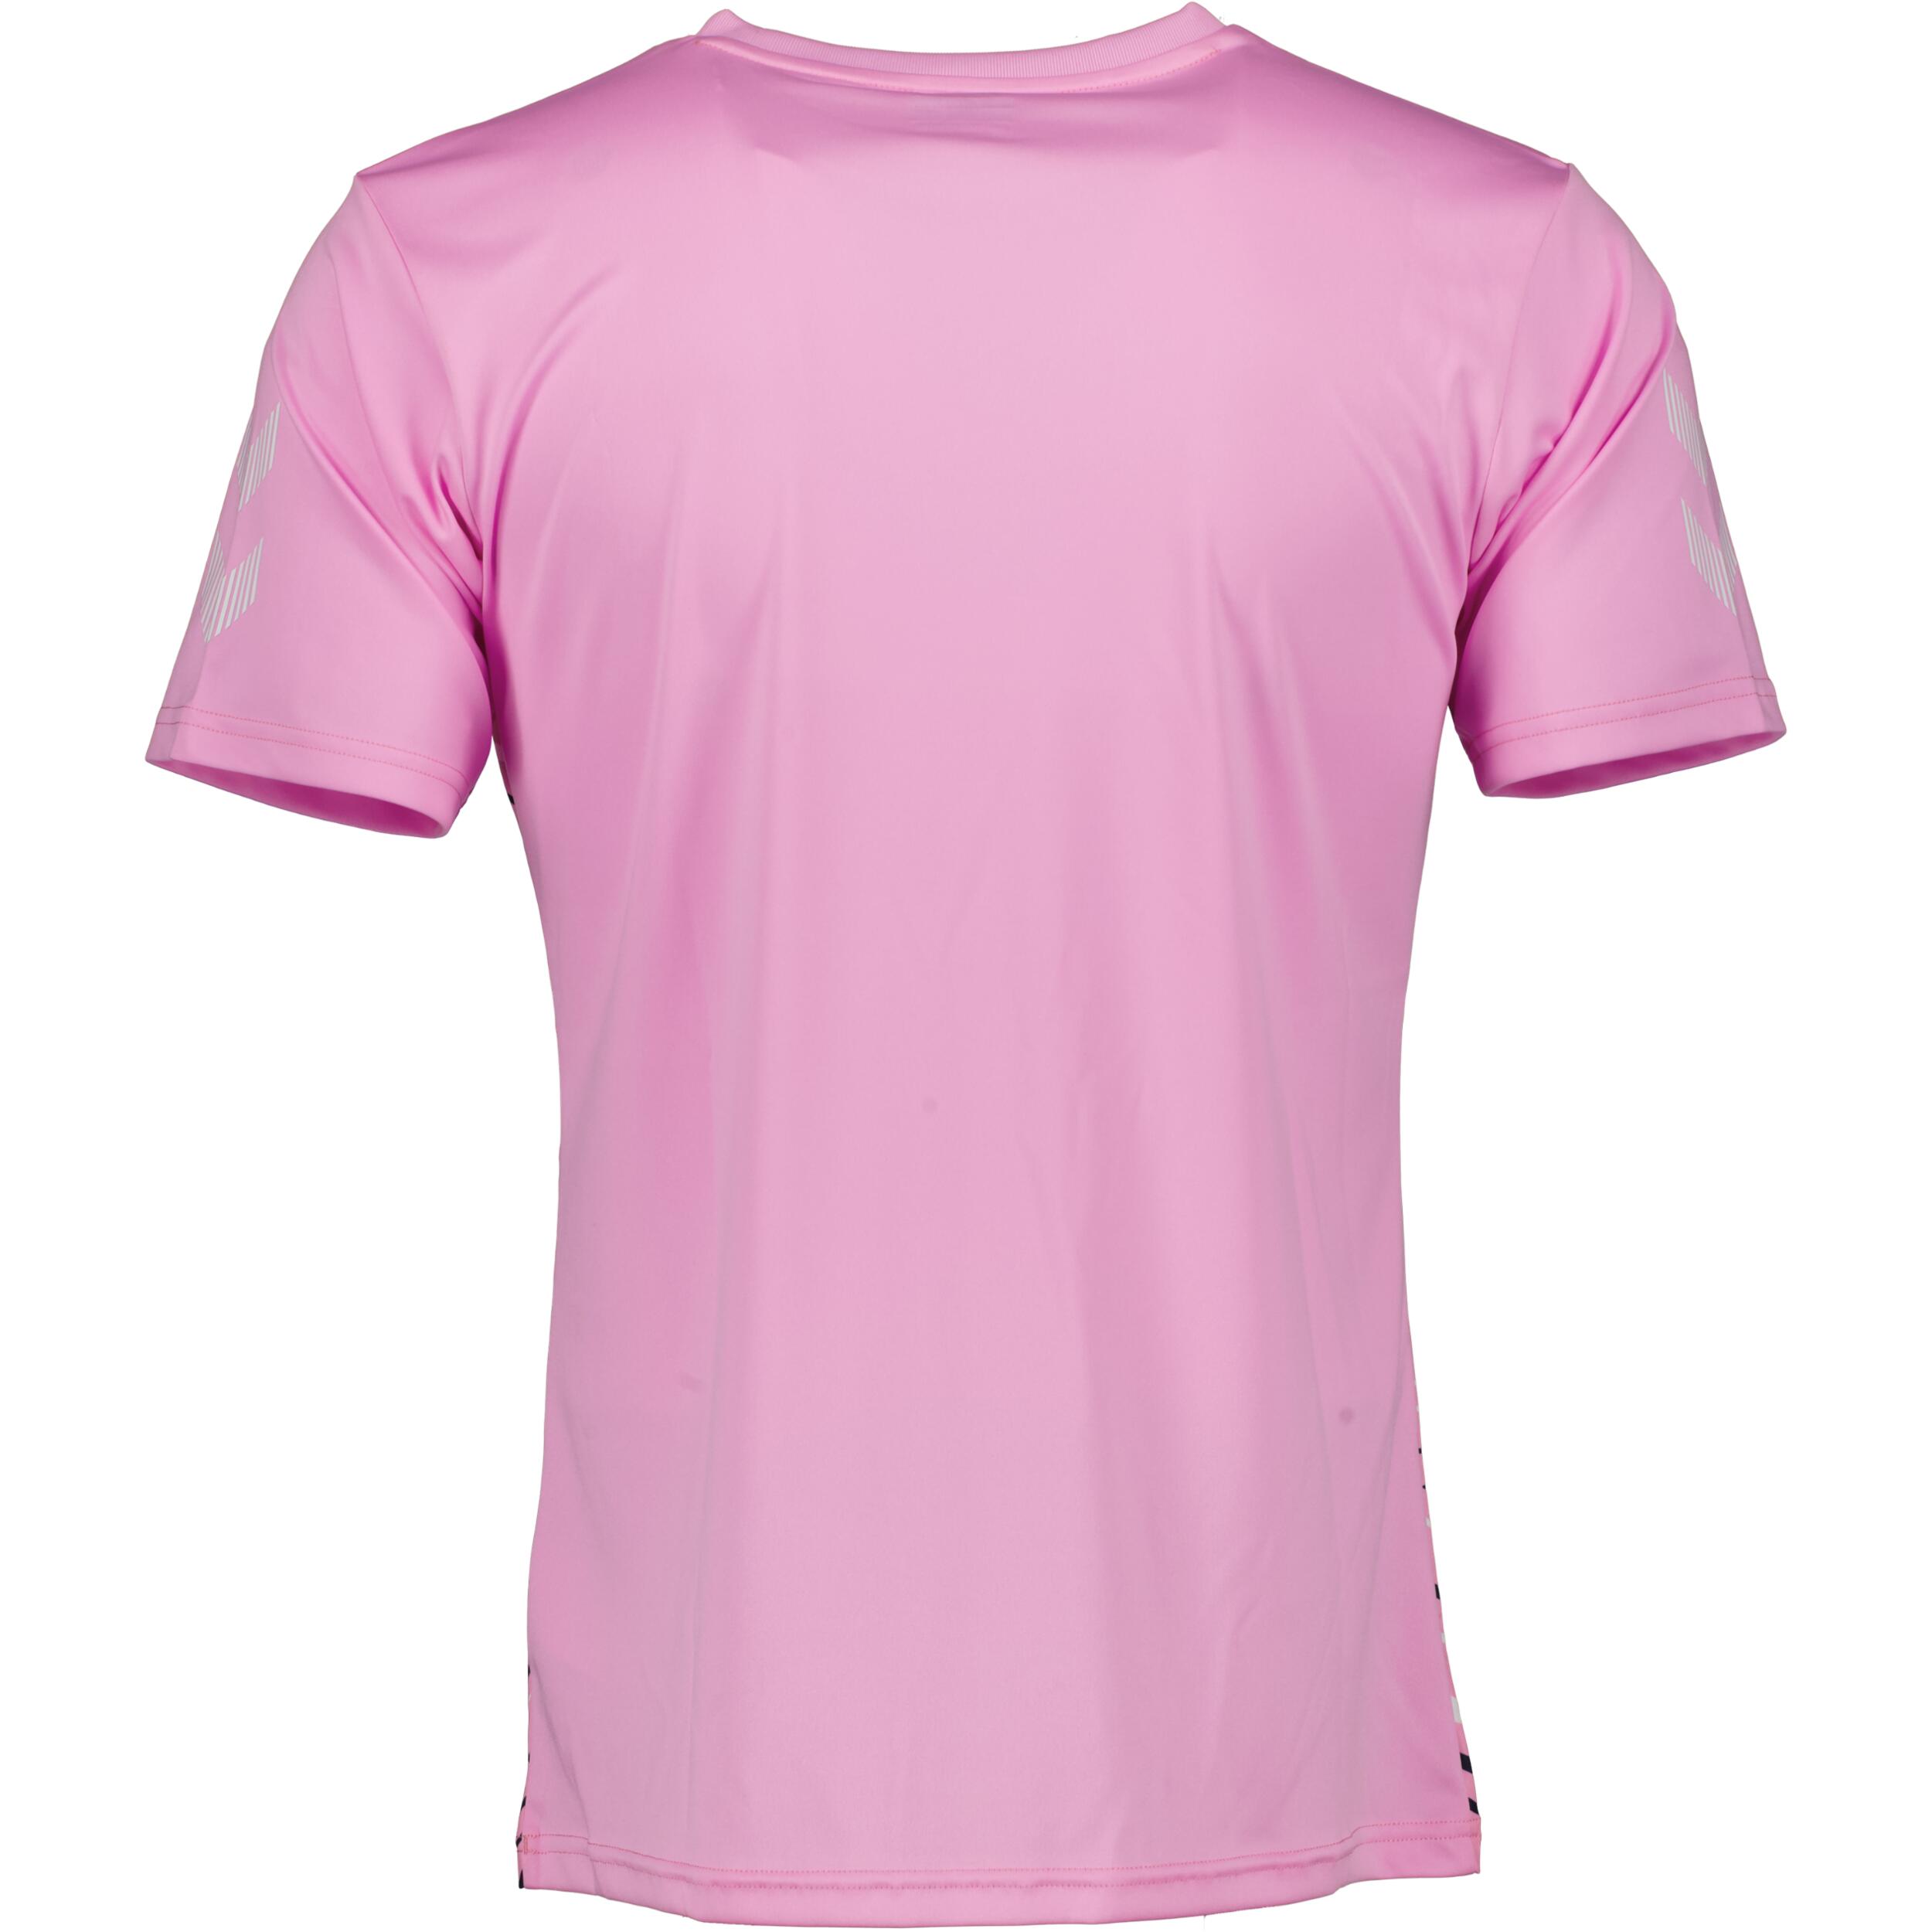 Hydro jersey for men, great for football, in cotton candy/marine/white 2/3